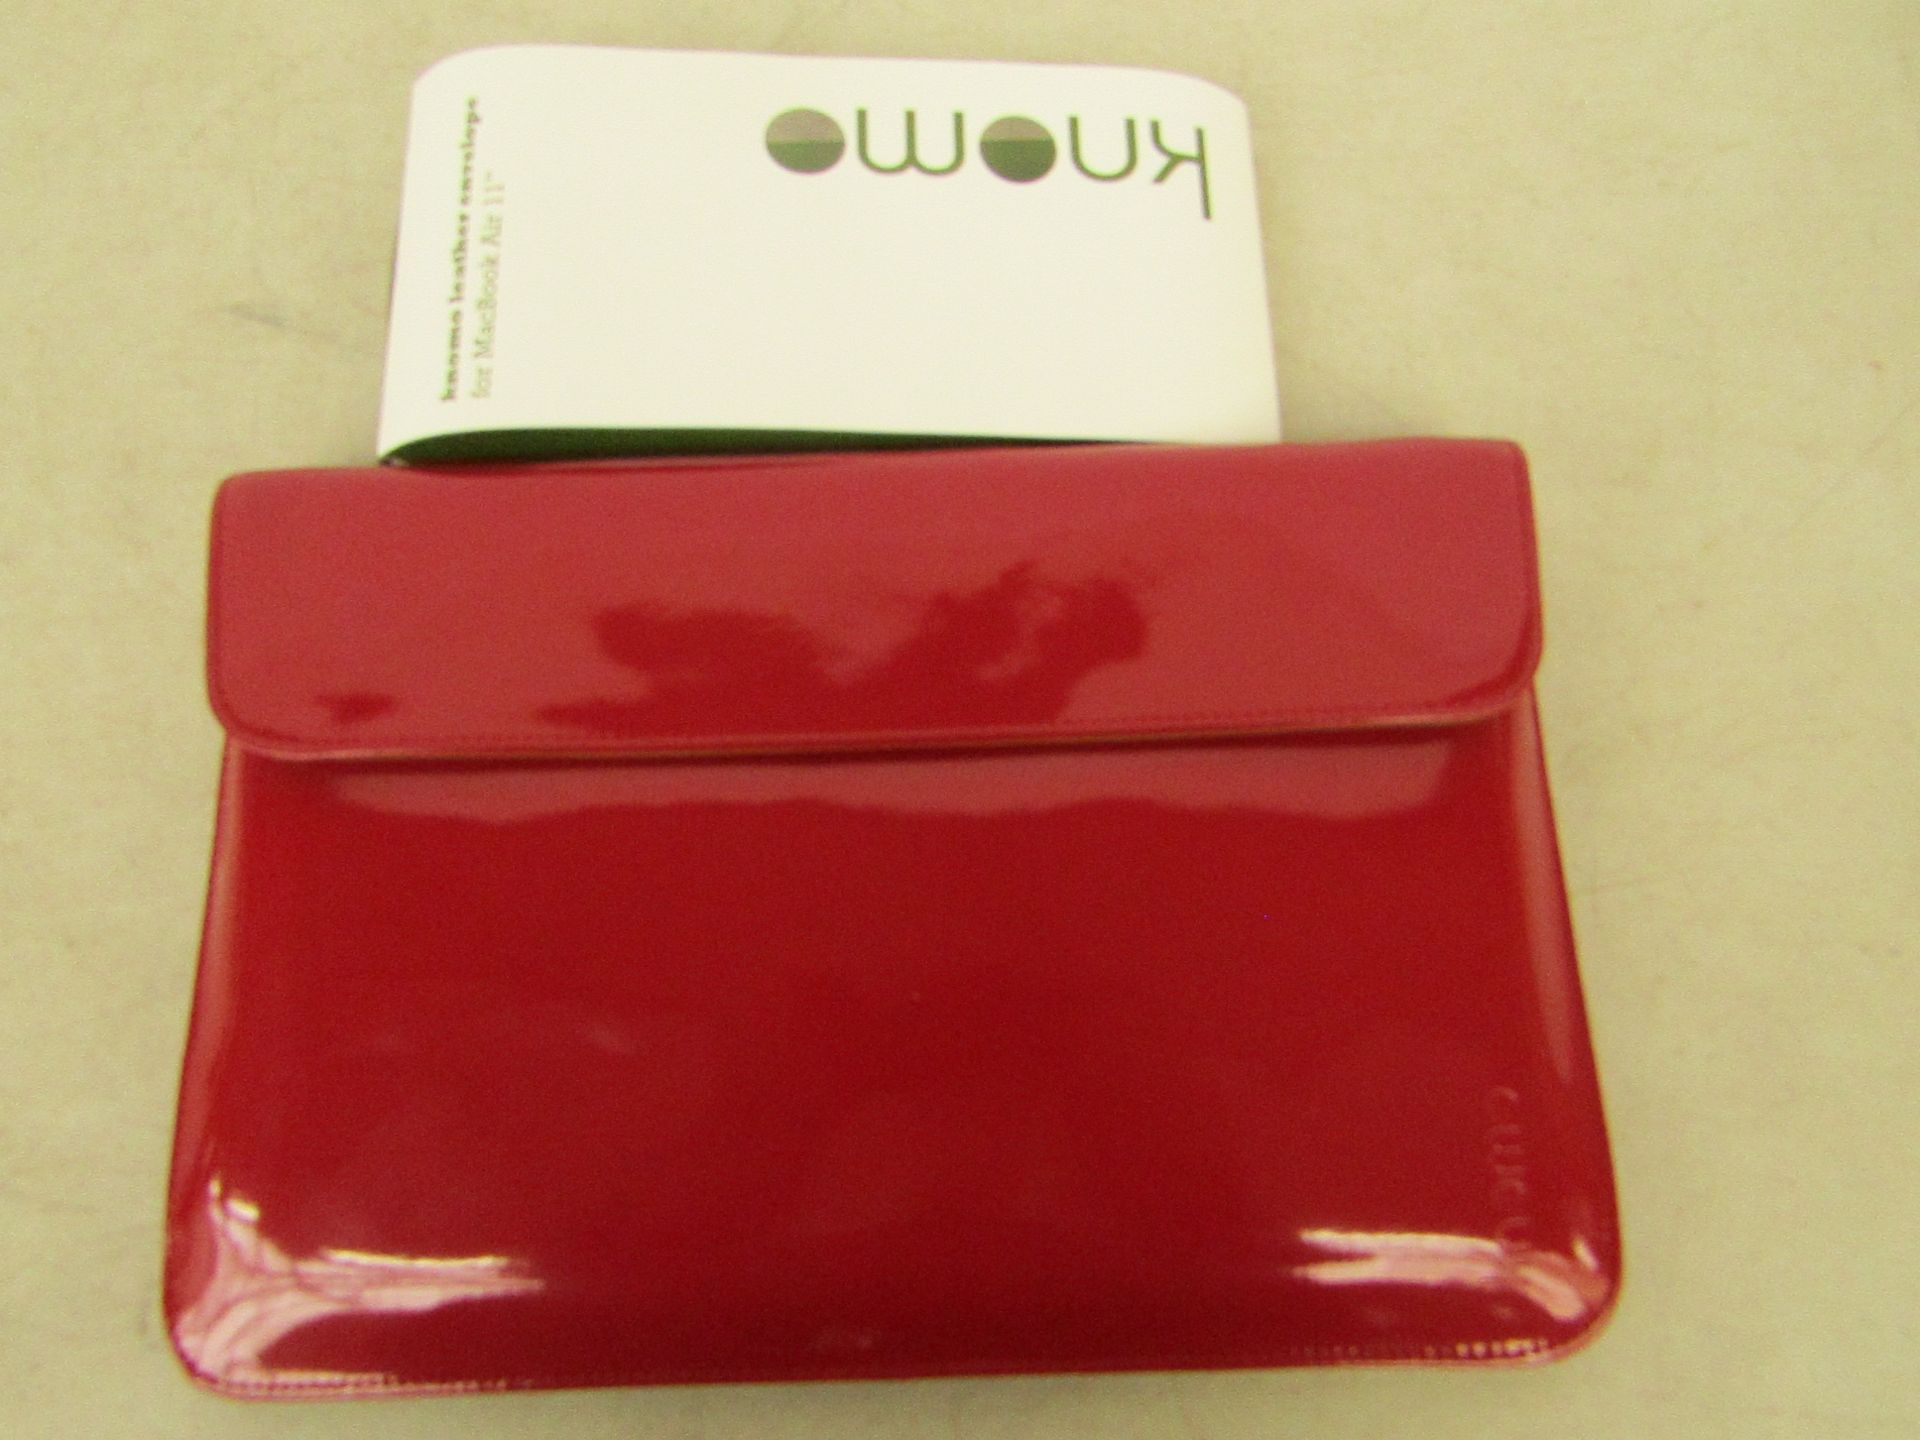 10x Knomo red leather envelope for MacBook Air 11", brand new and boxed/packaged. Each RRP £49.00